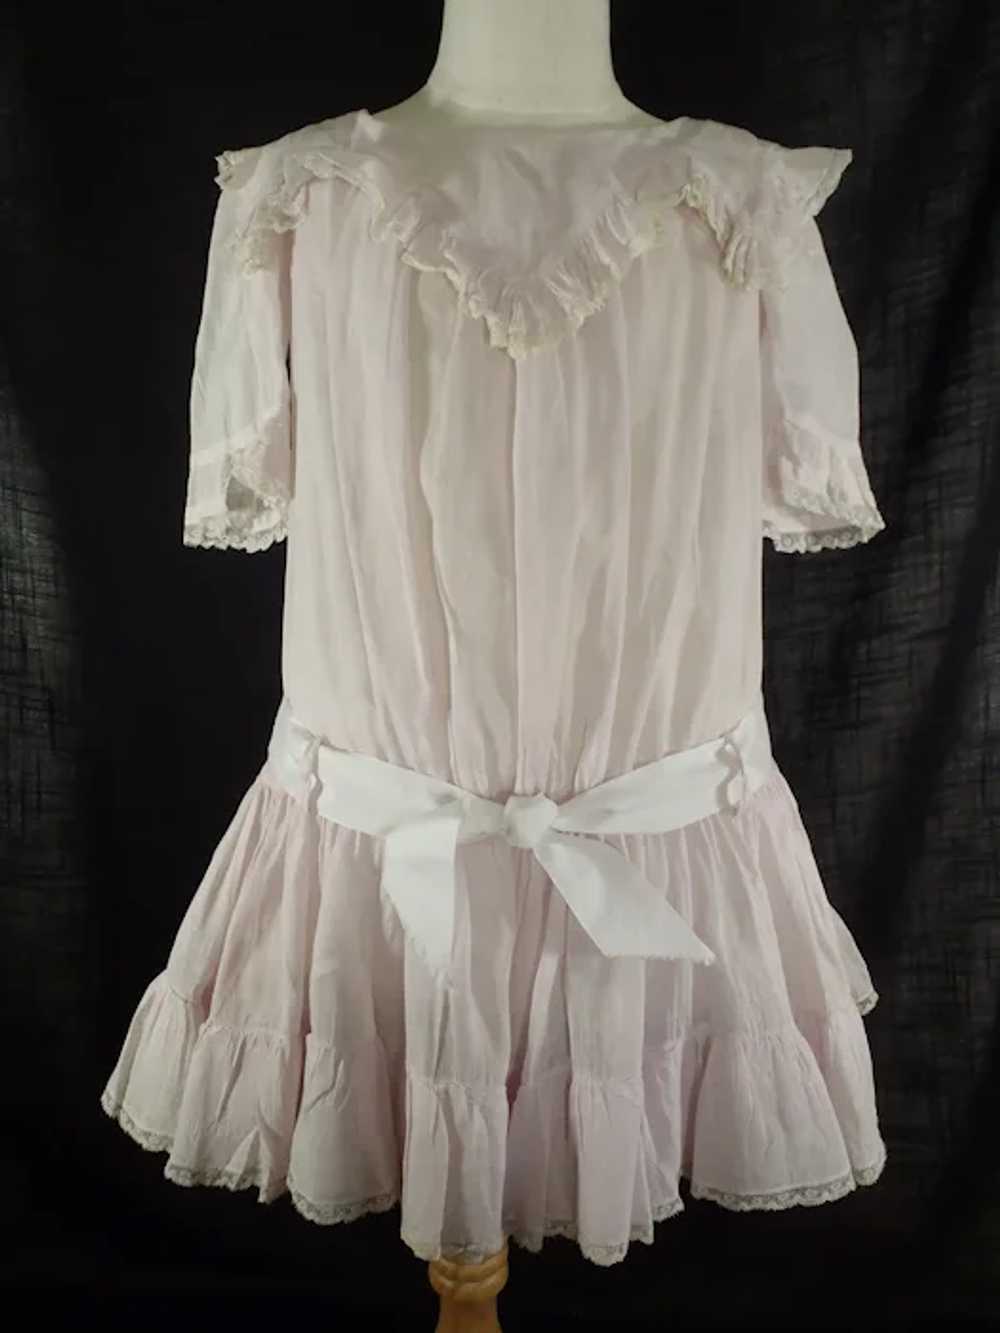 Adorable Victorian c1890-1900 Girls party dress - image 2